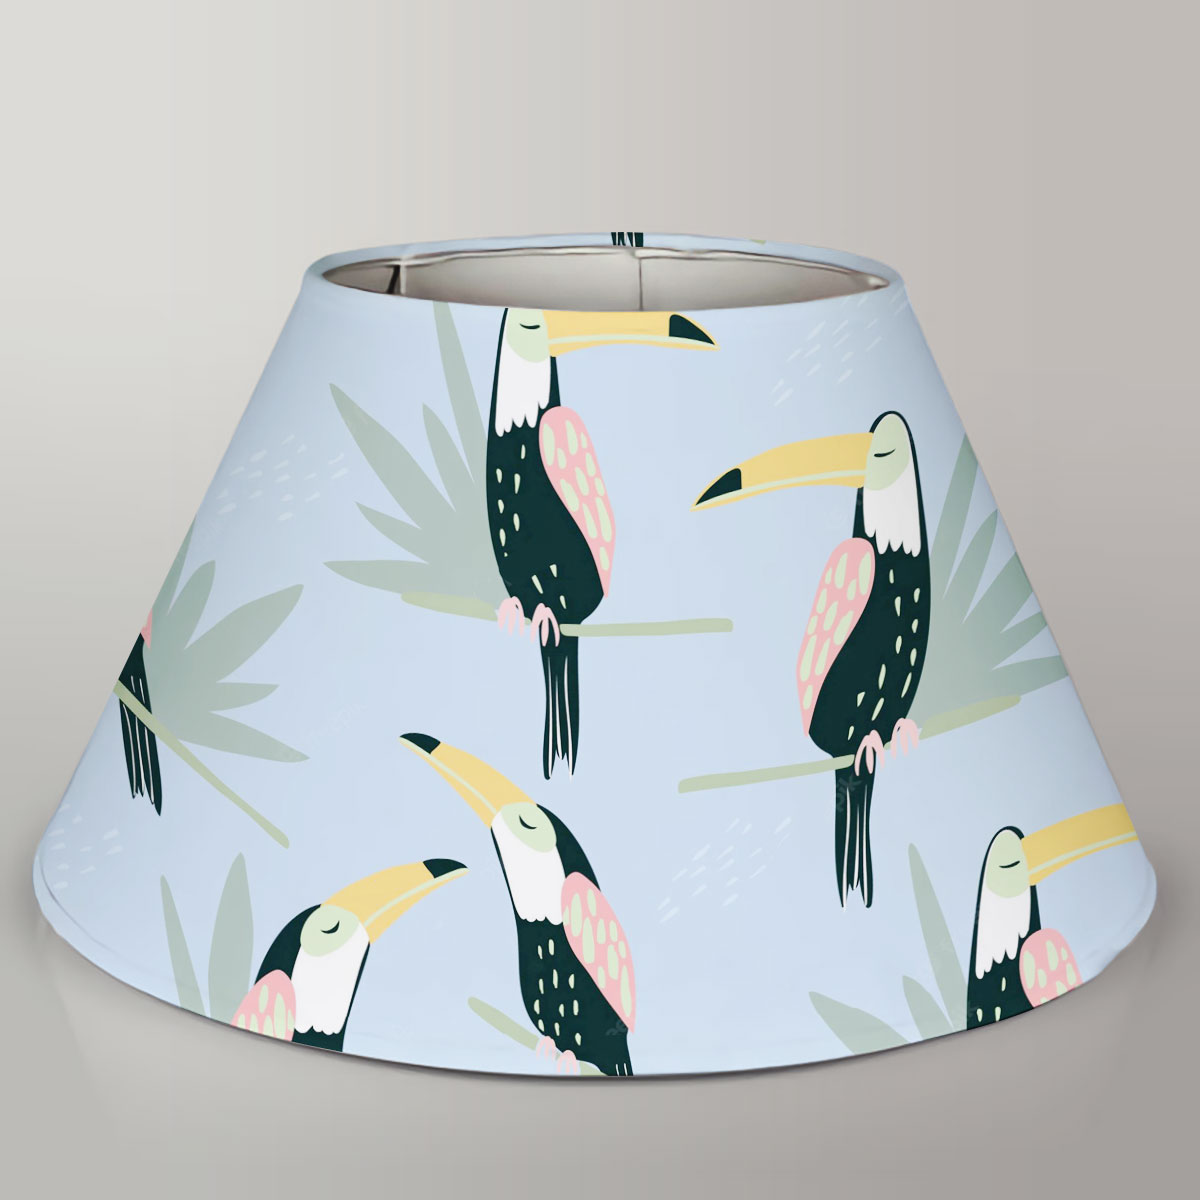 Coon Sleeping Tropical Toucan Lamp Cover